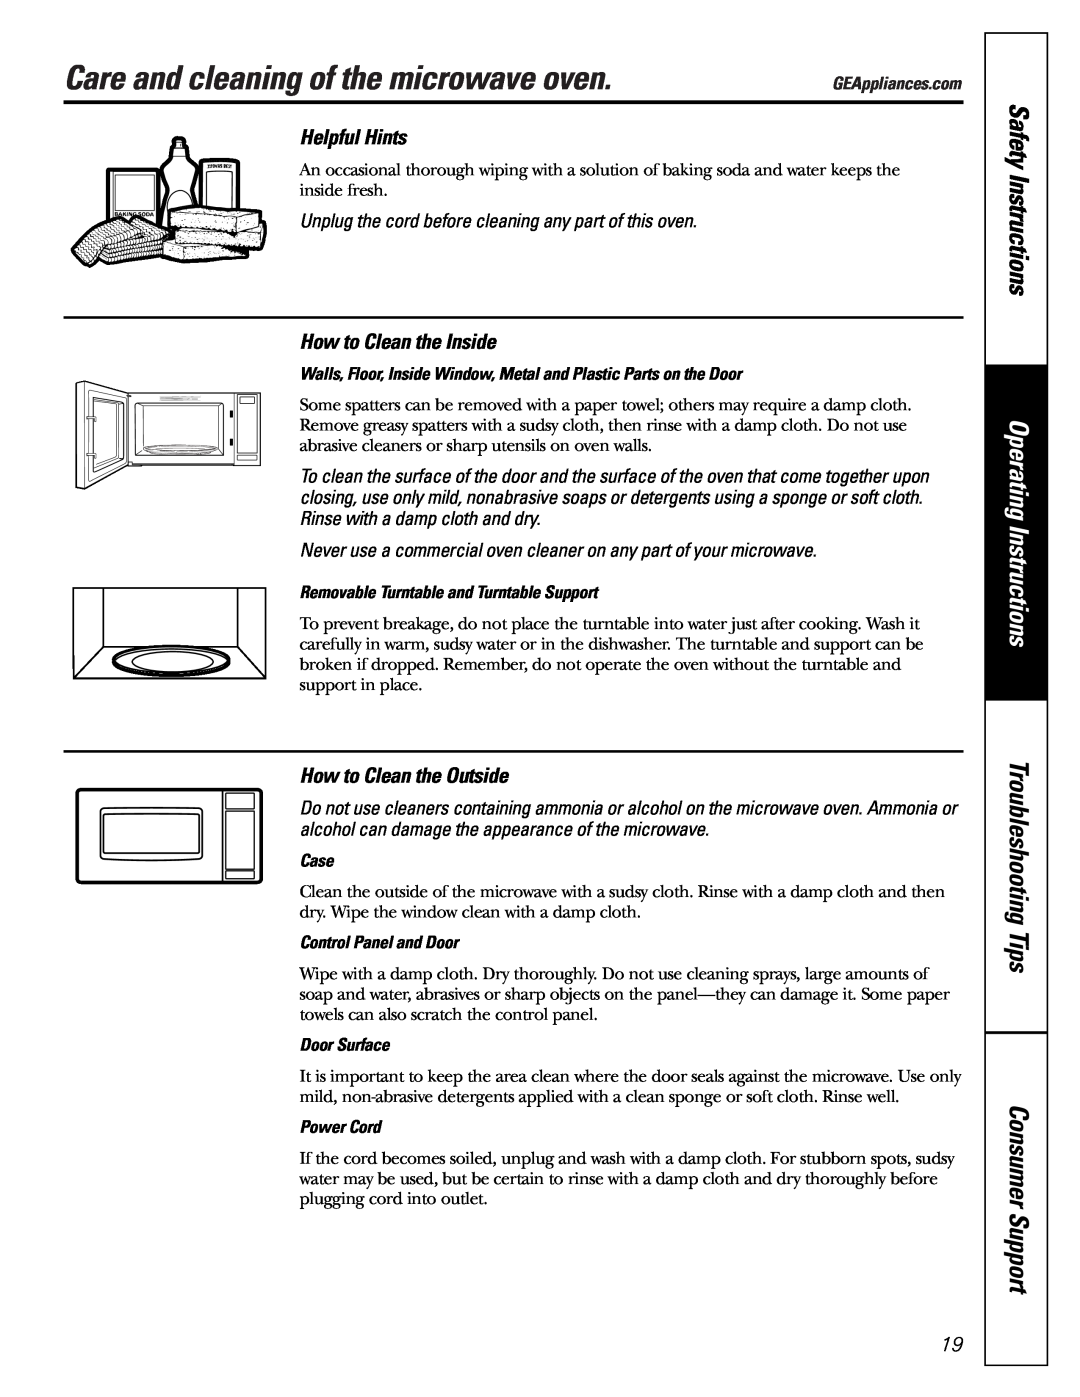 GE JE1140 Care and cleaning of the microwave oven, Safety Instructions, Operating Instructions, Case, Door Surface 